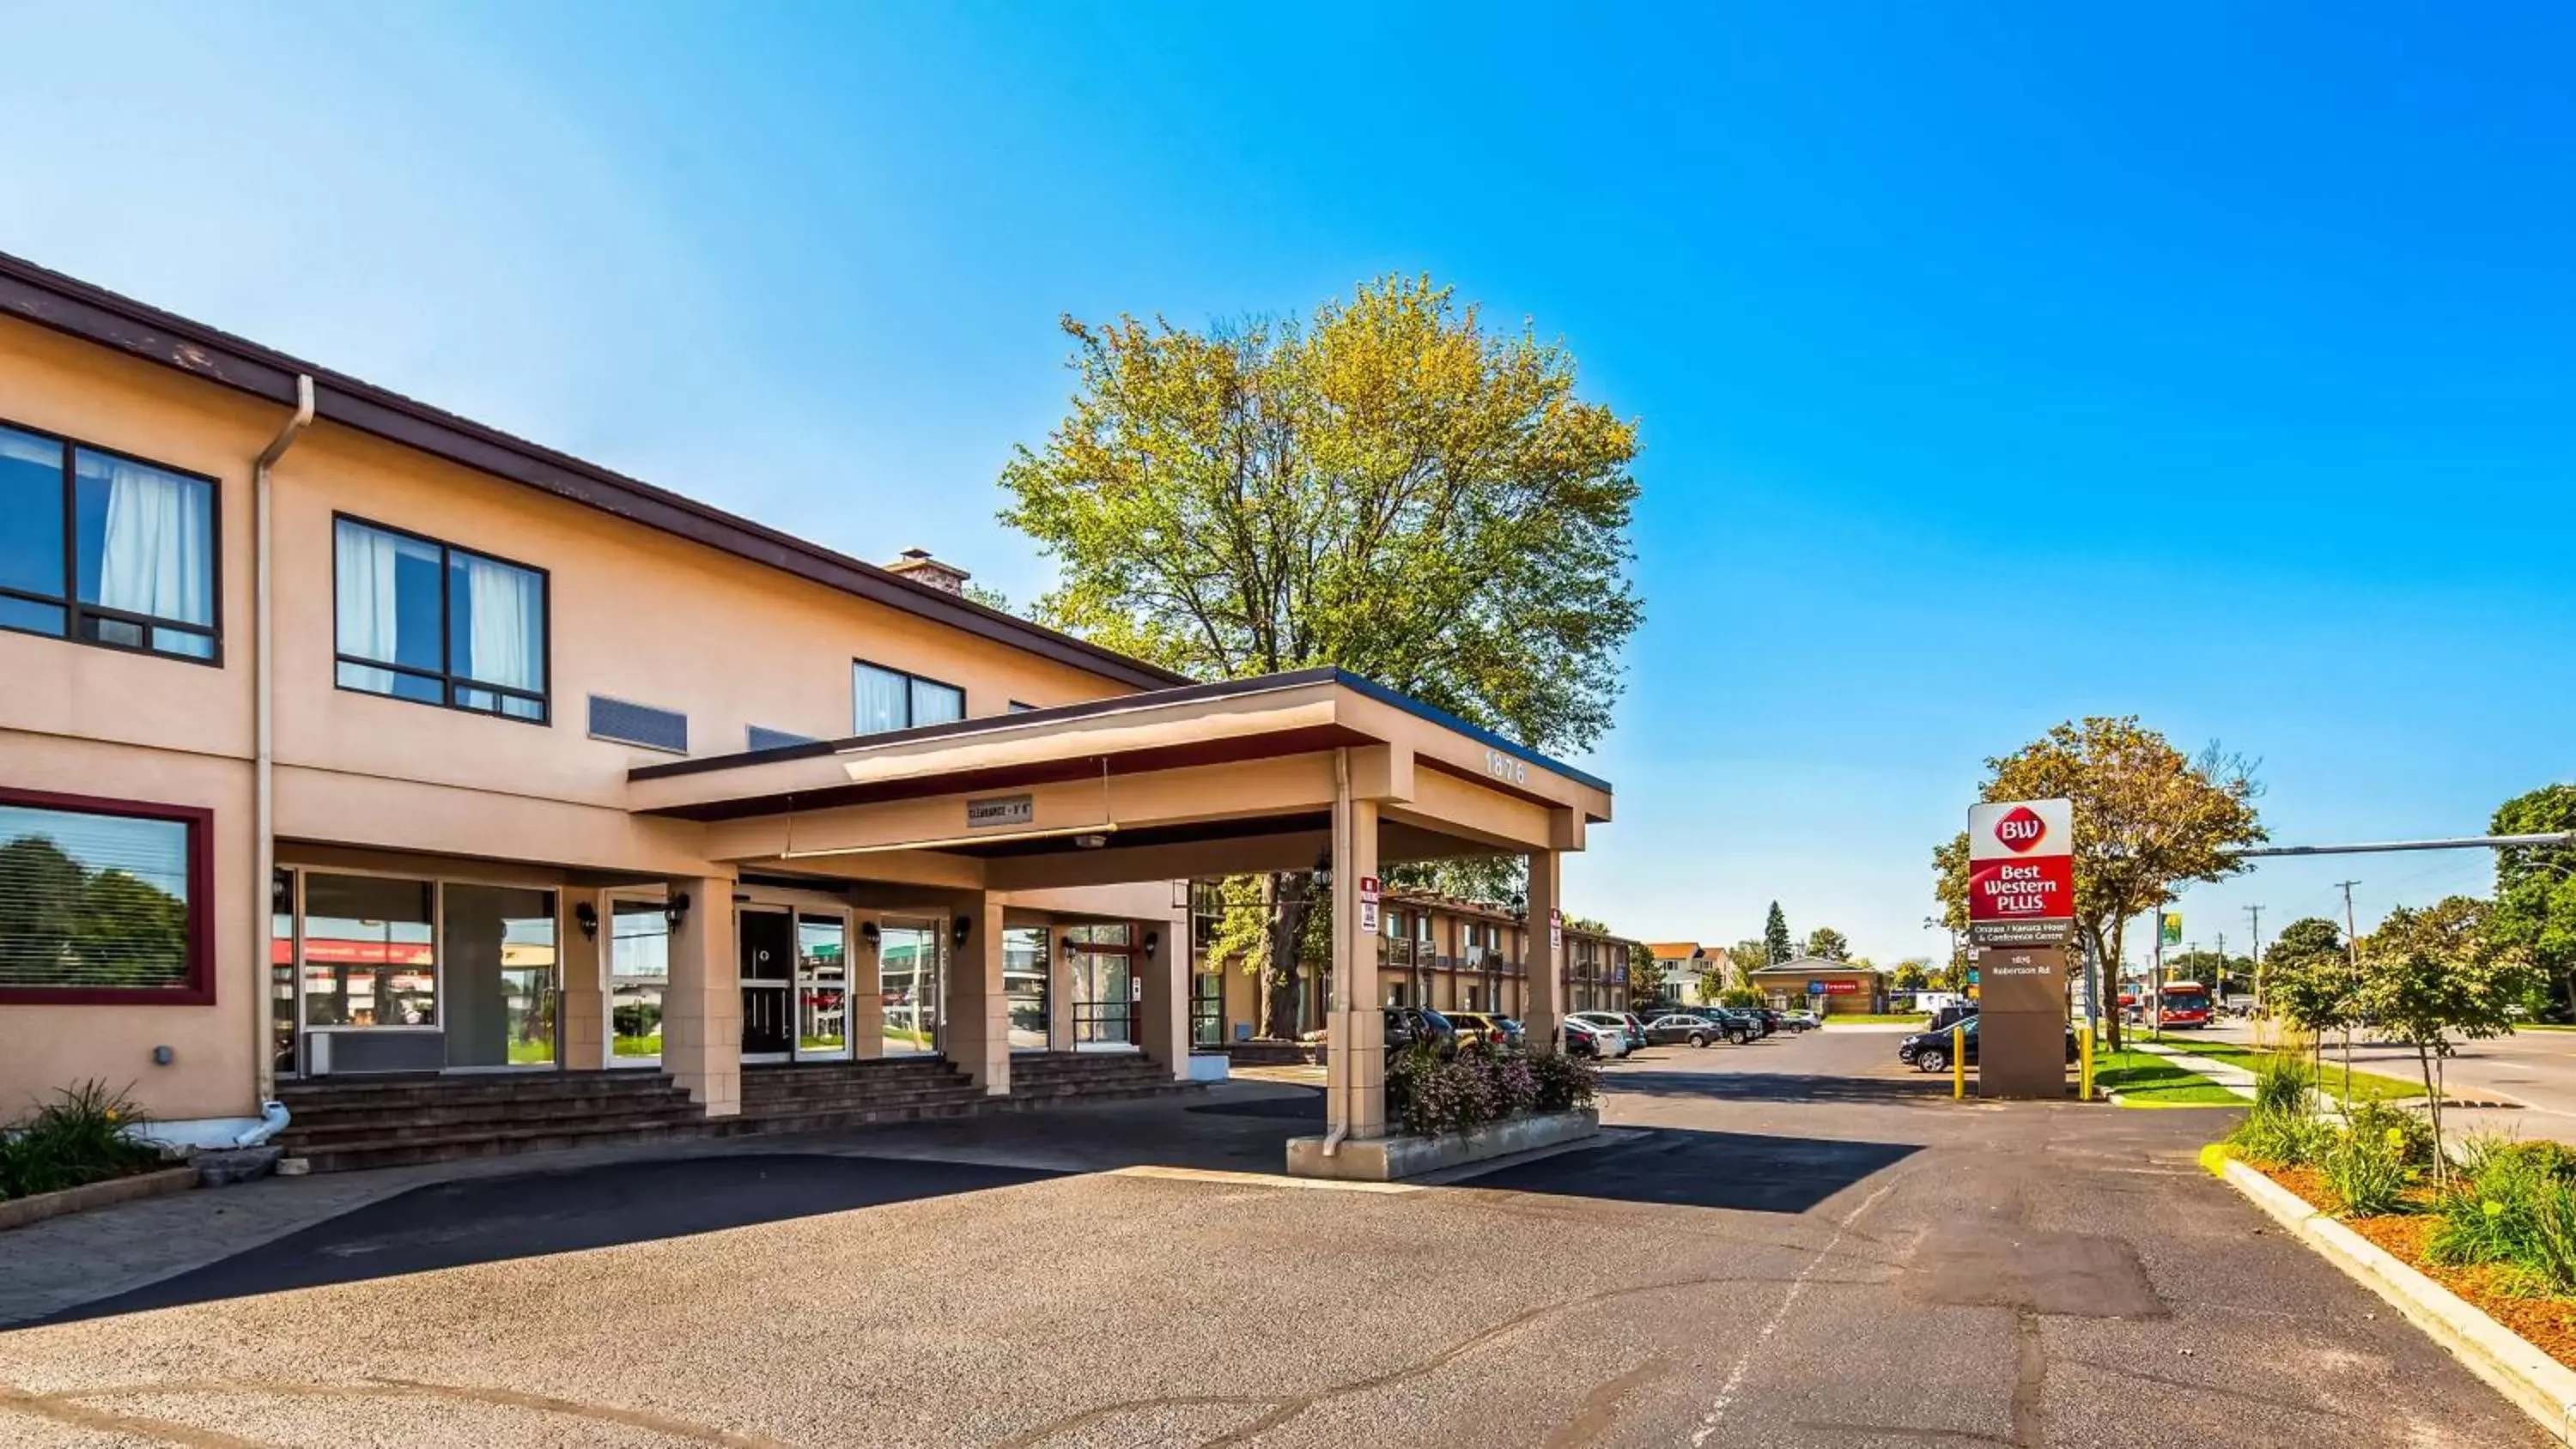 Property Building in Best Western Plus Ottawa Kanata Hotel and Conference Centre